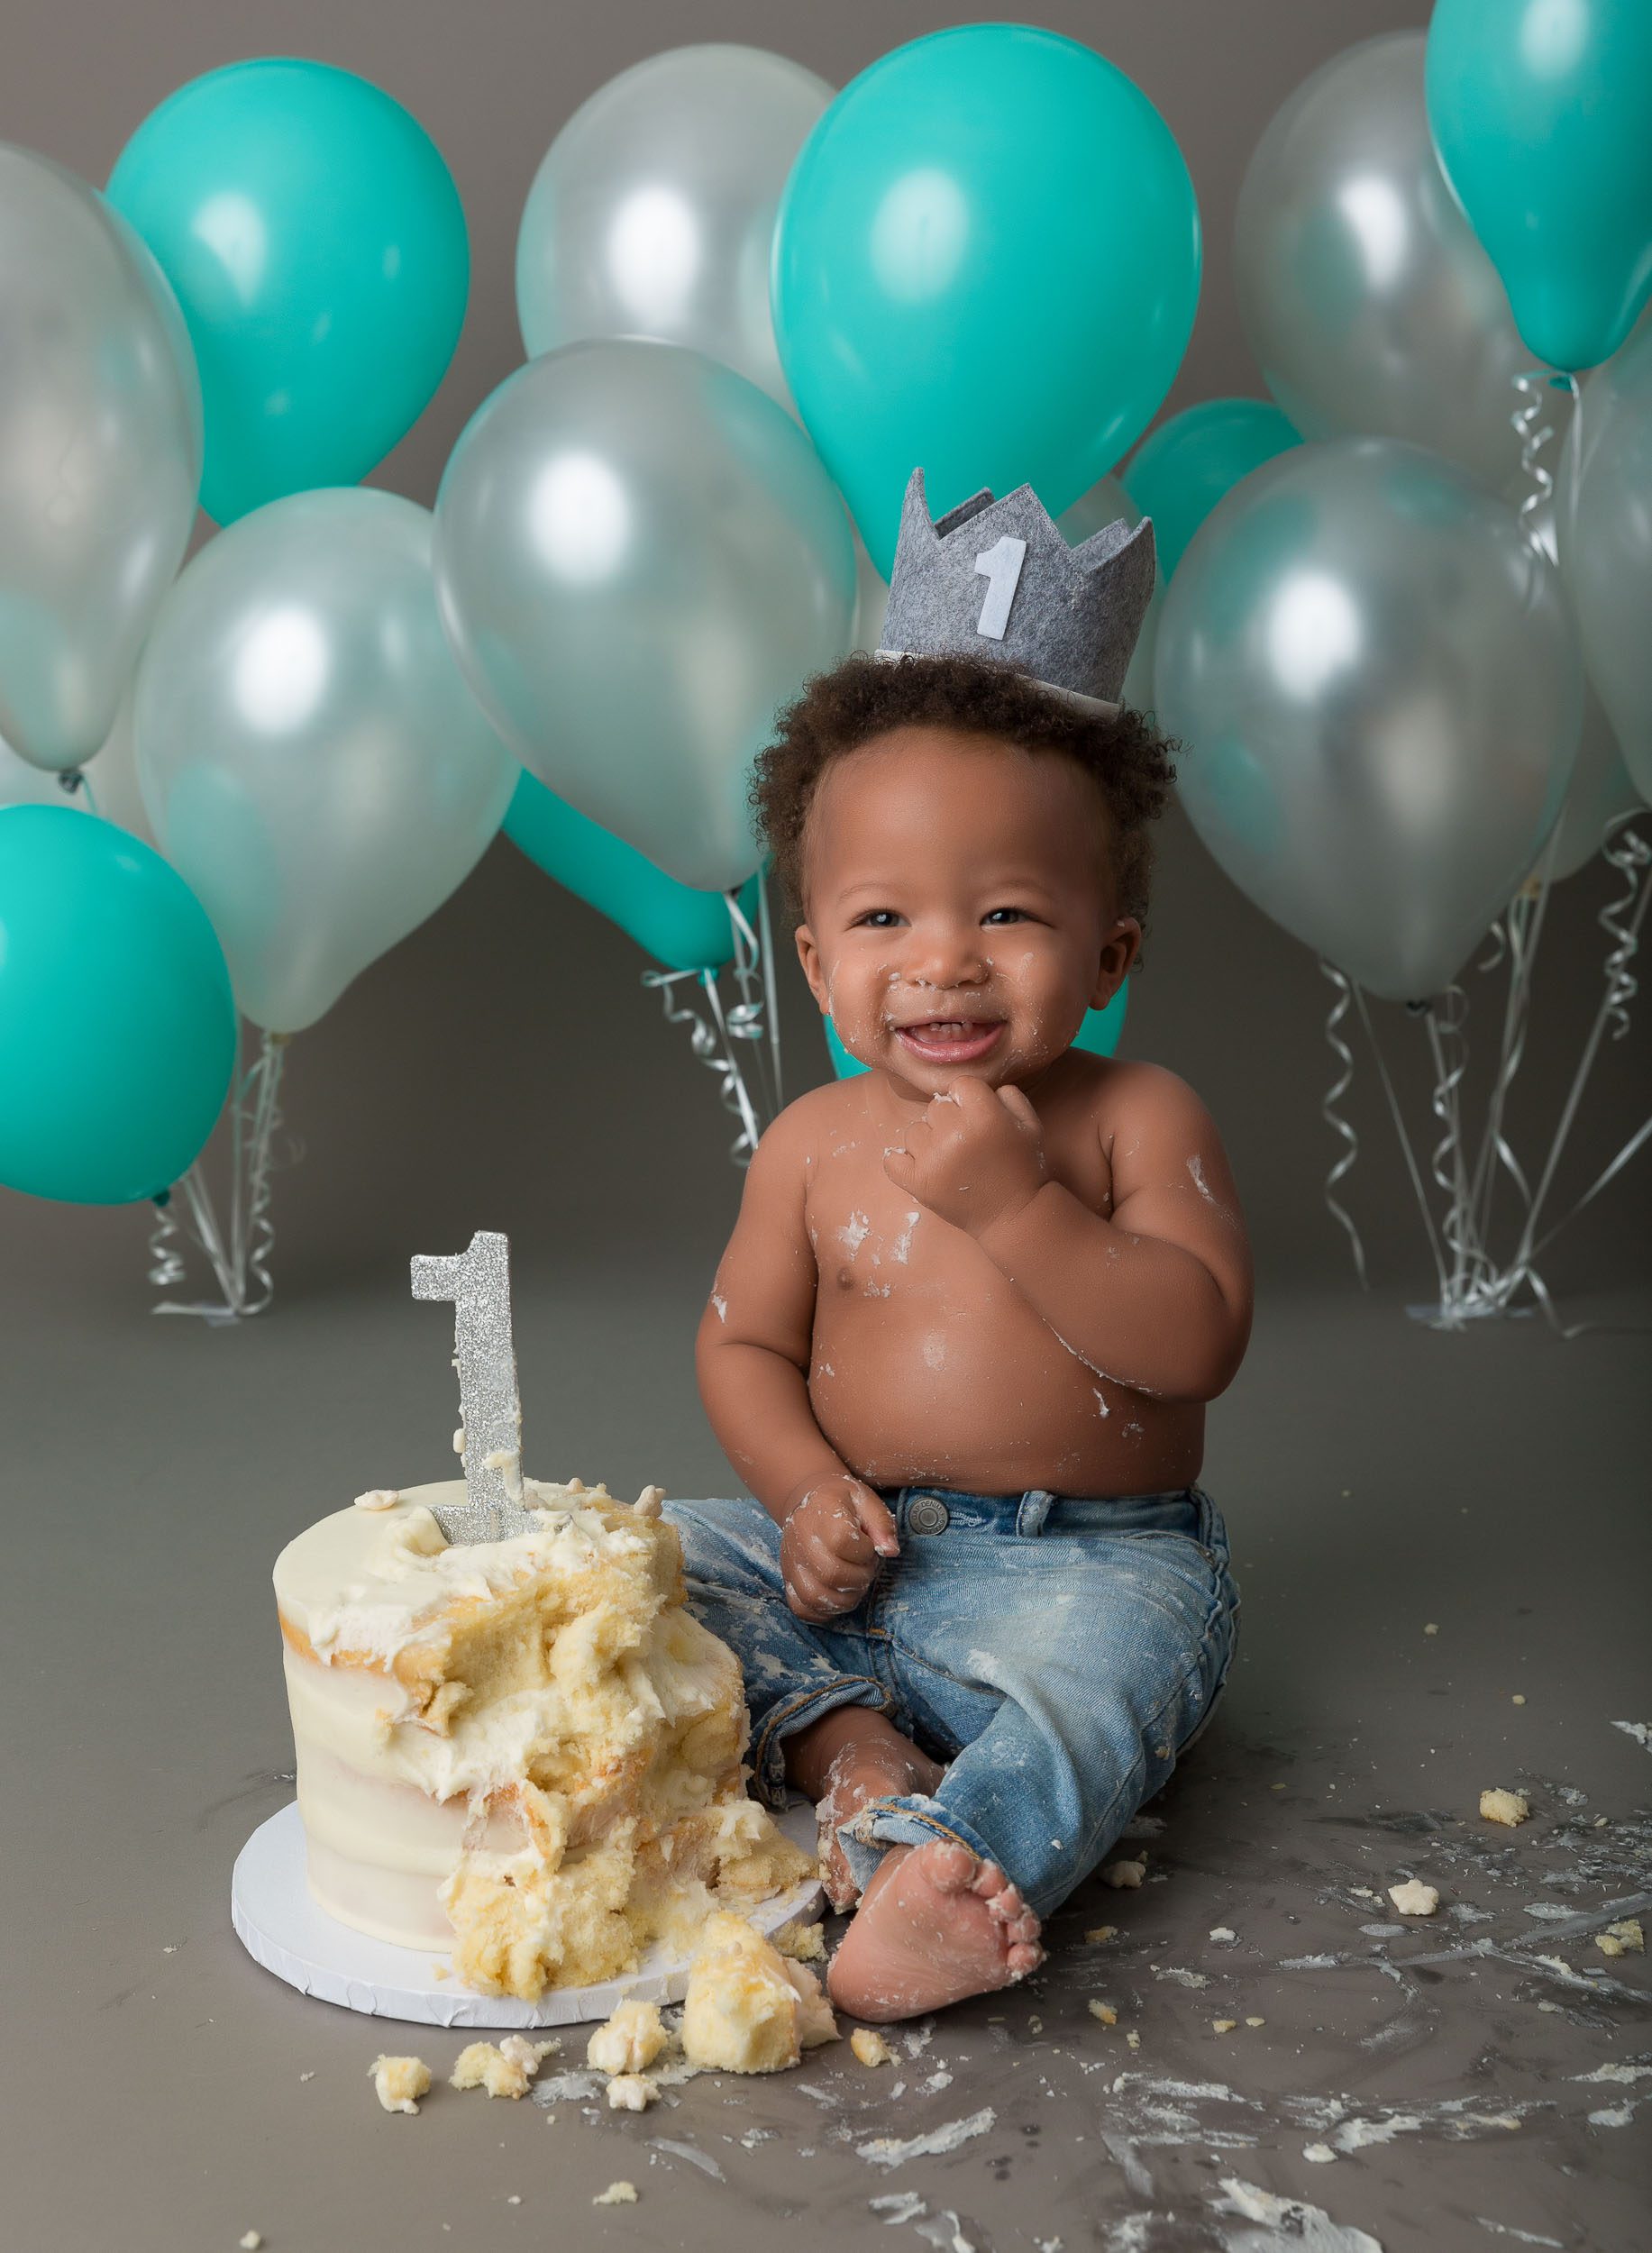 baby eating cake with balloons